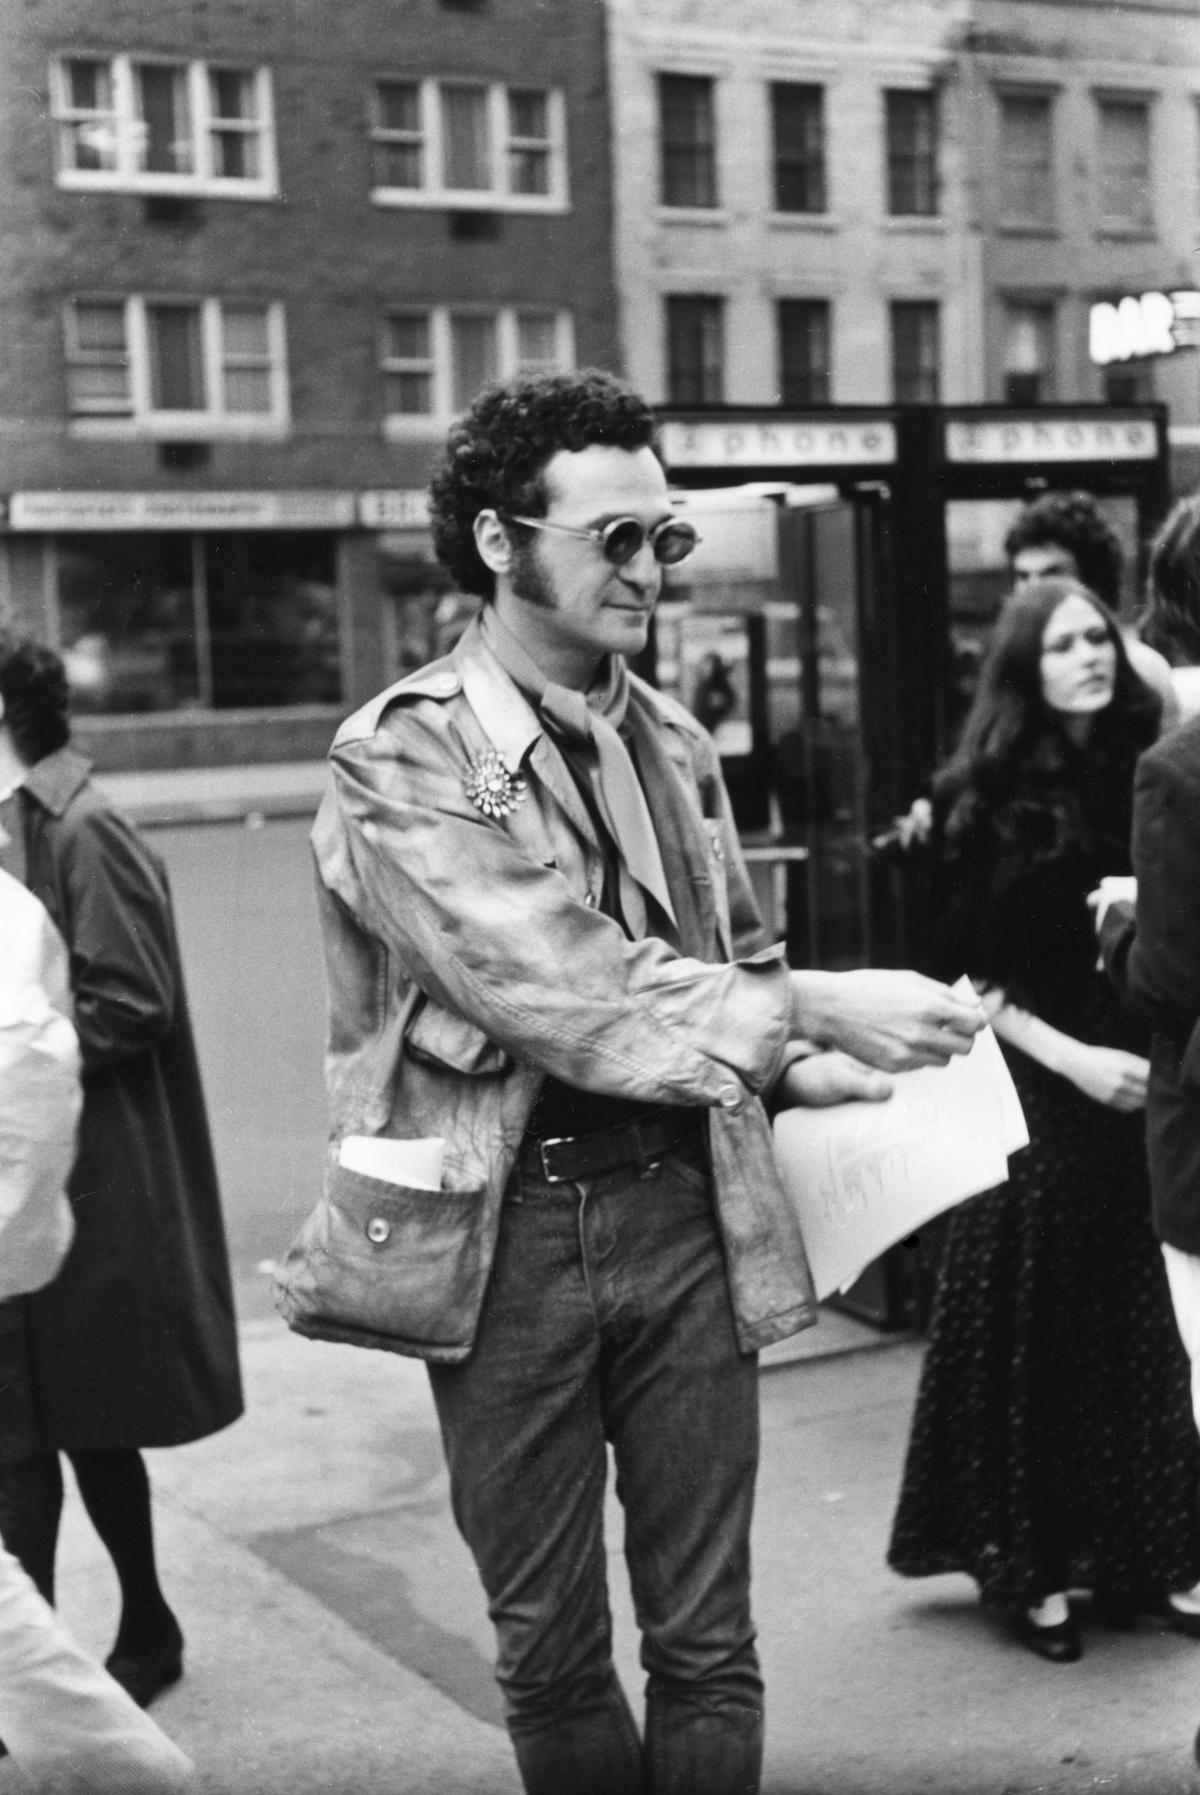 John Giorno passing out poems to passersby on Fifth Avenue, New York, in April 1969 Photo: Fred W. McDarrah/Getty Images